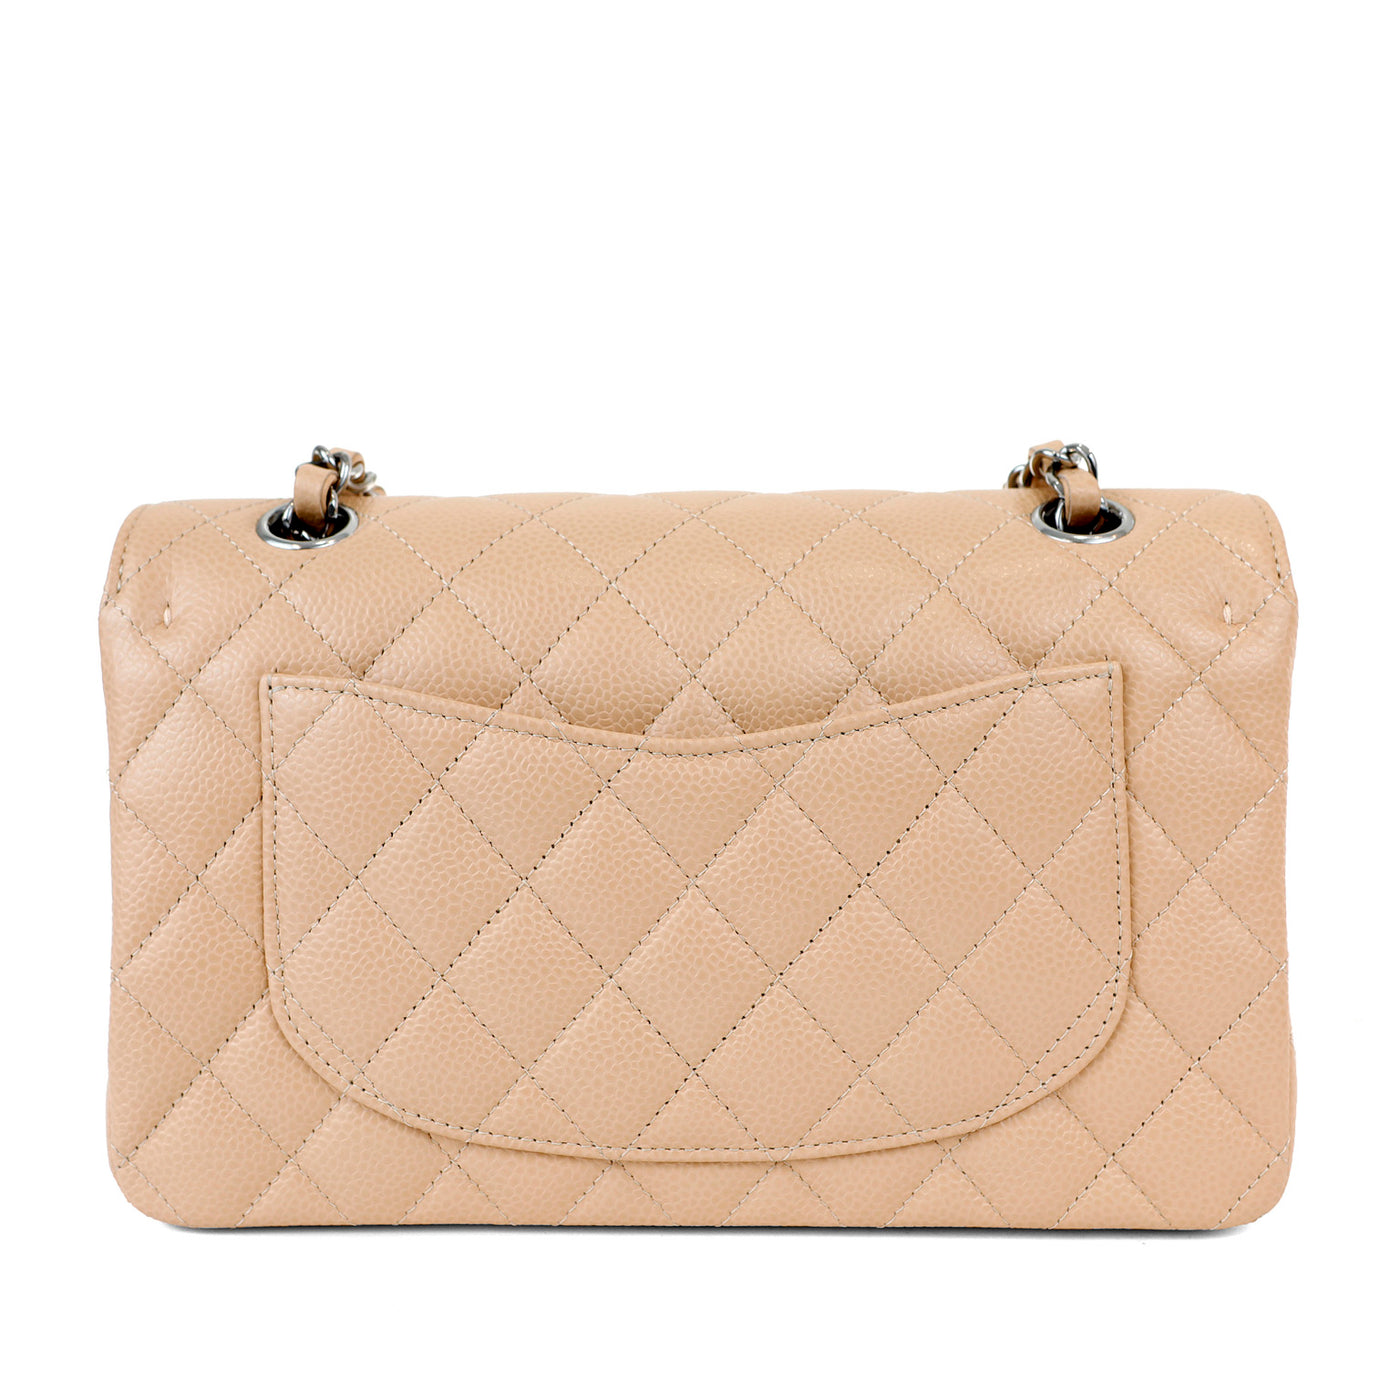 Chanel Beige Caviar Small Classic with Silver Hardware